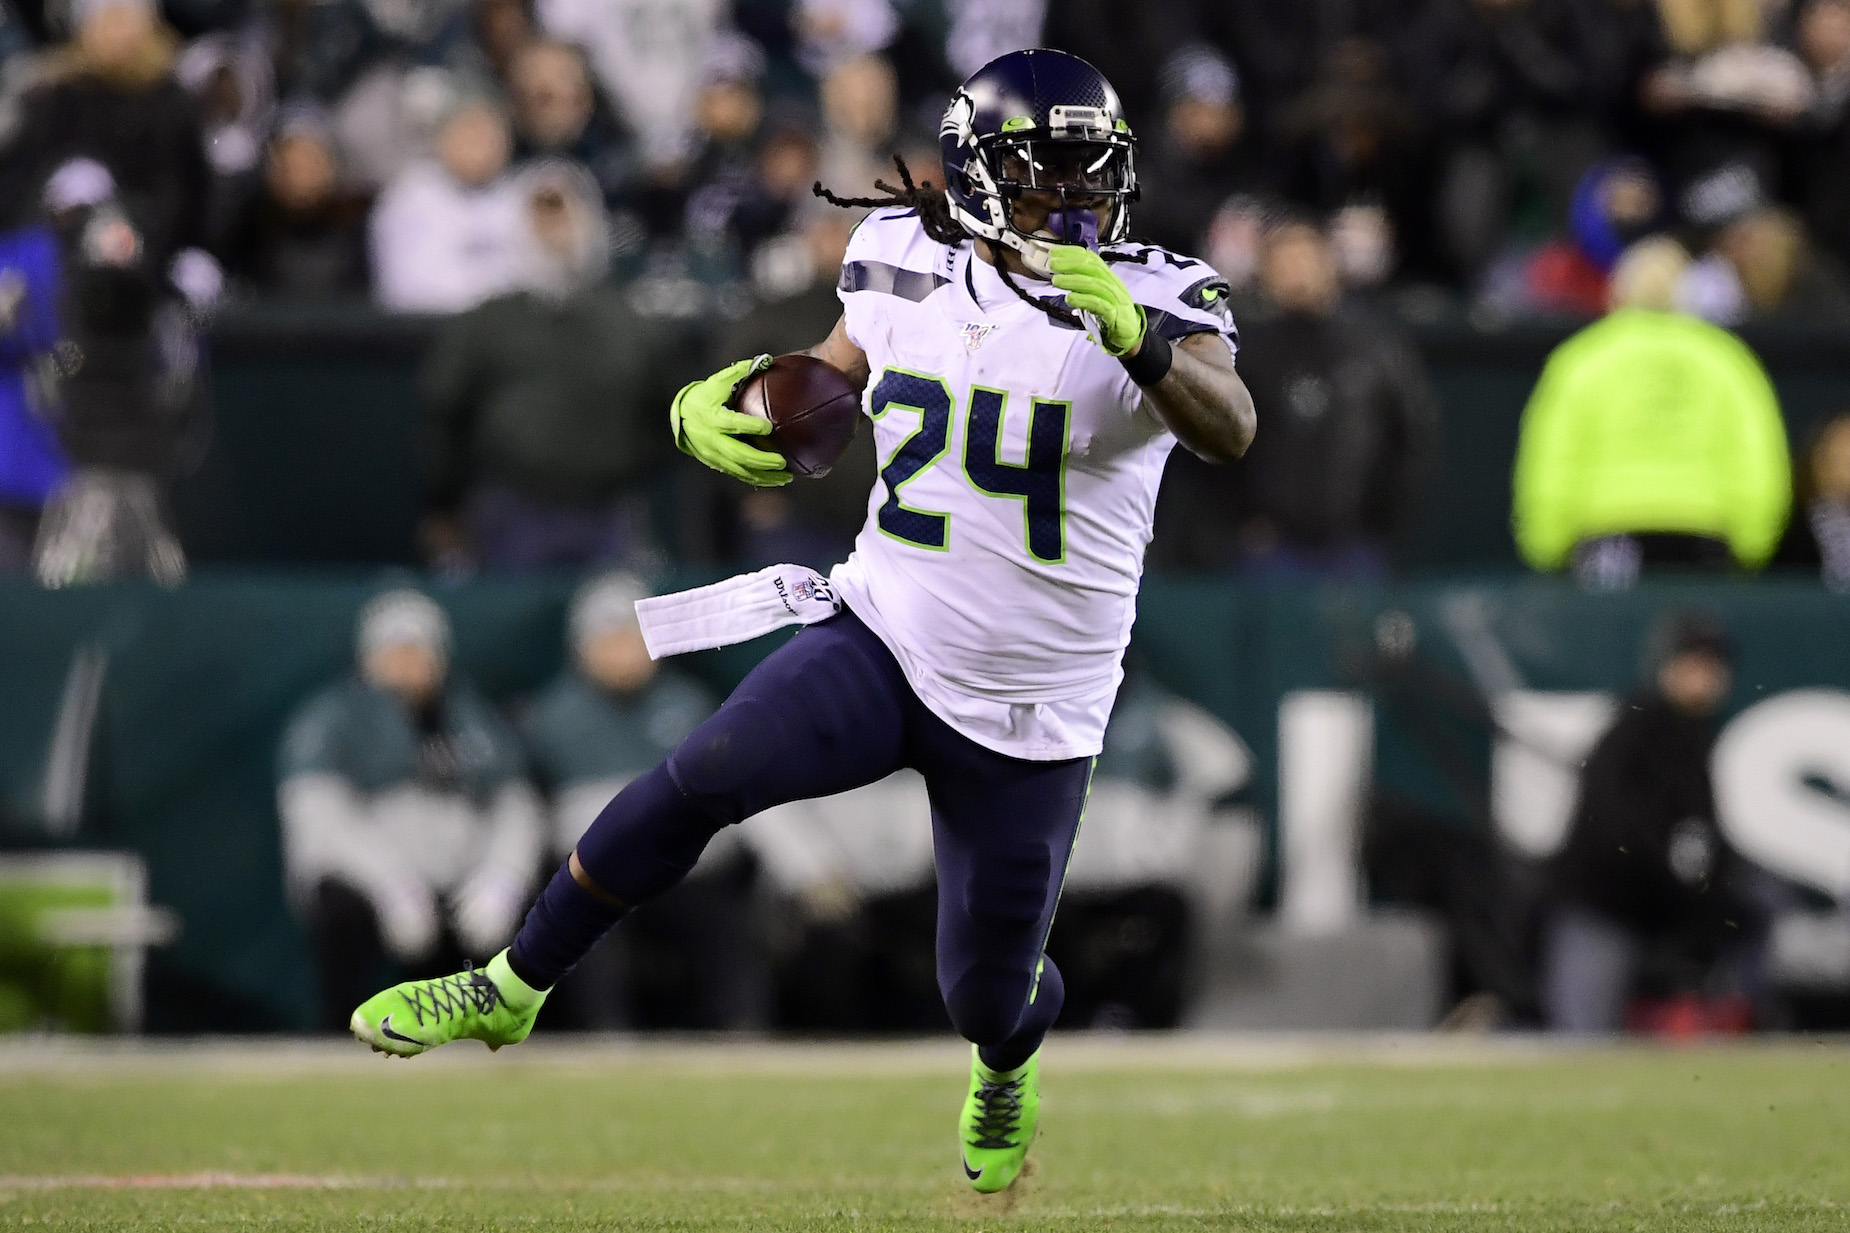 Marshawn Lynch Got Ready For NFL Action With Following an Alcoholic Pregame Superstition